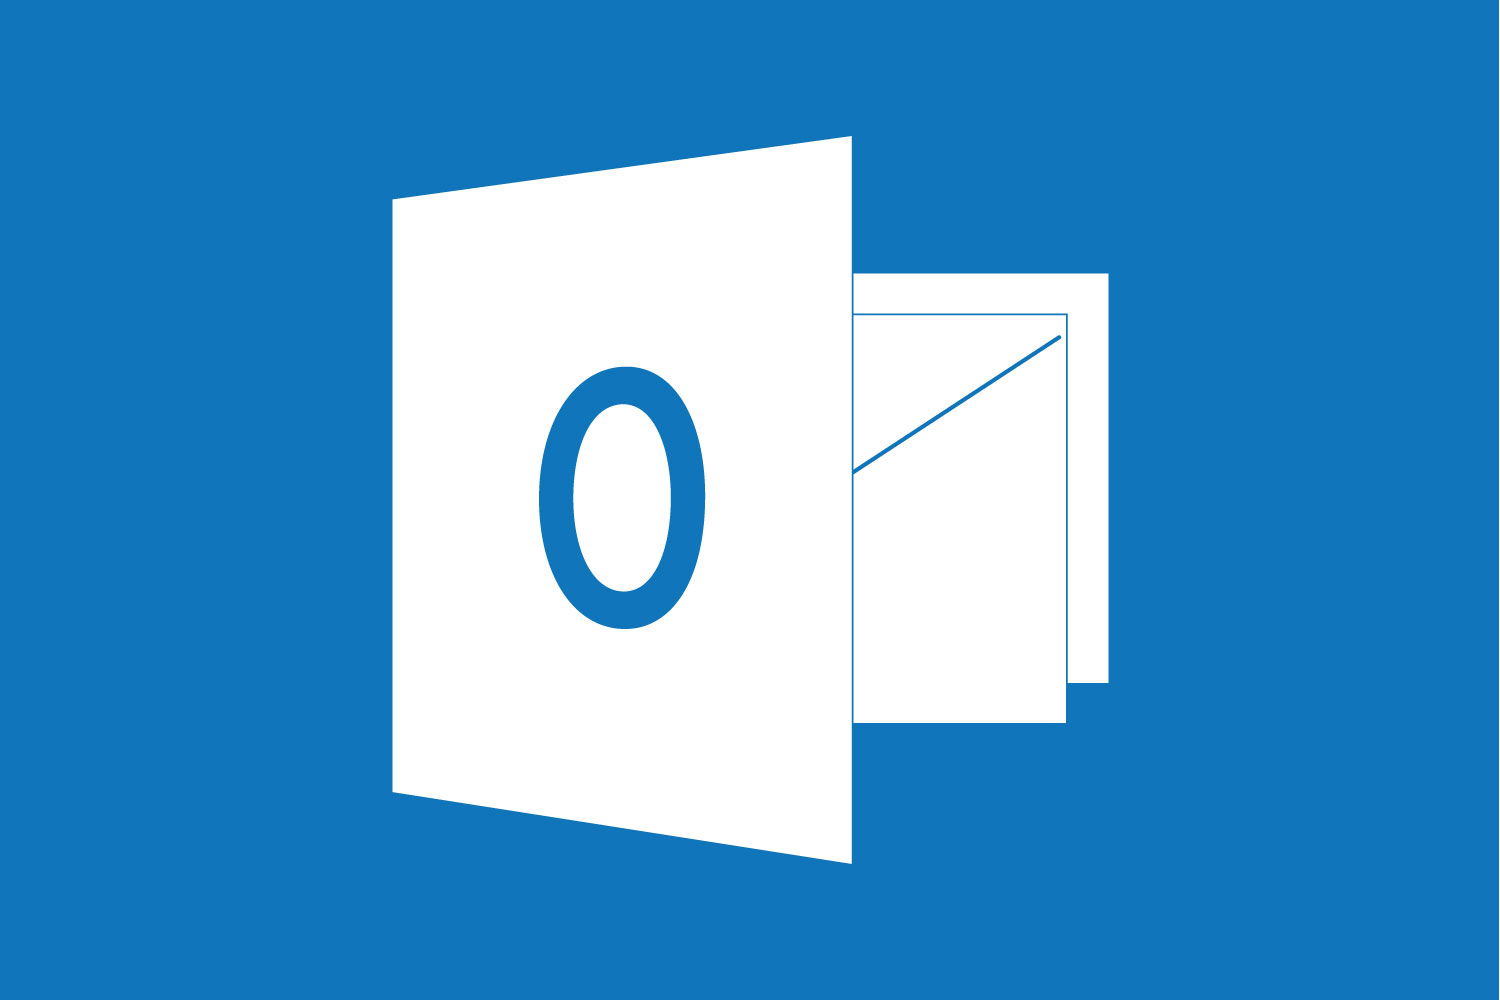 download microsoft office outlook 2010 free full version